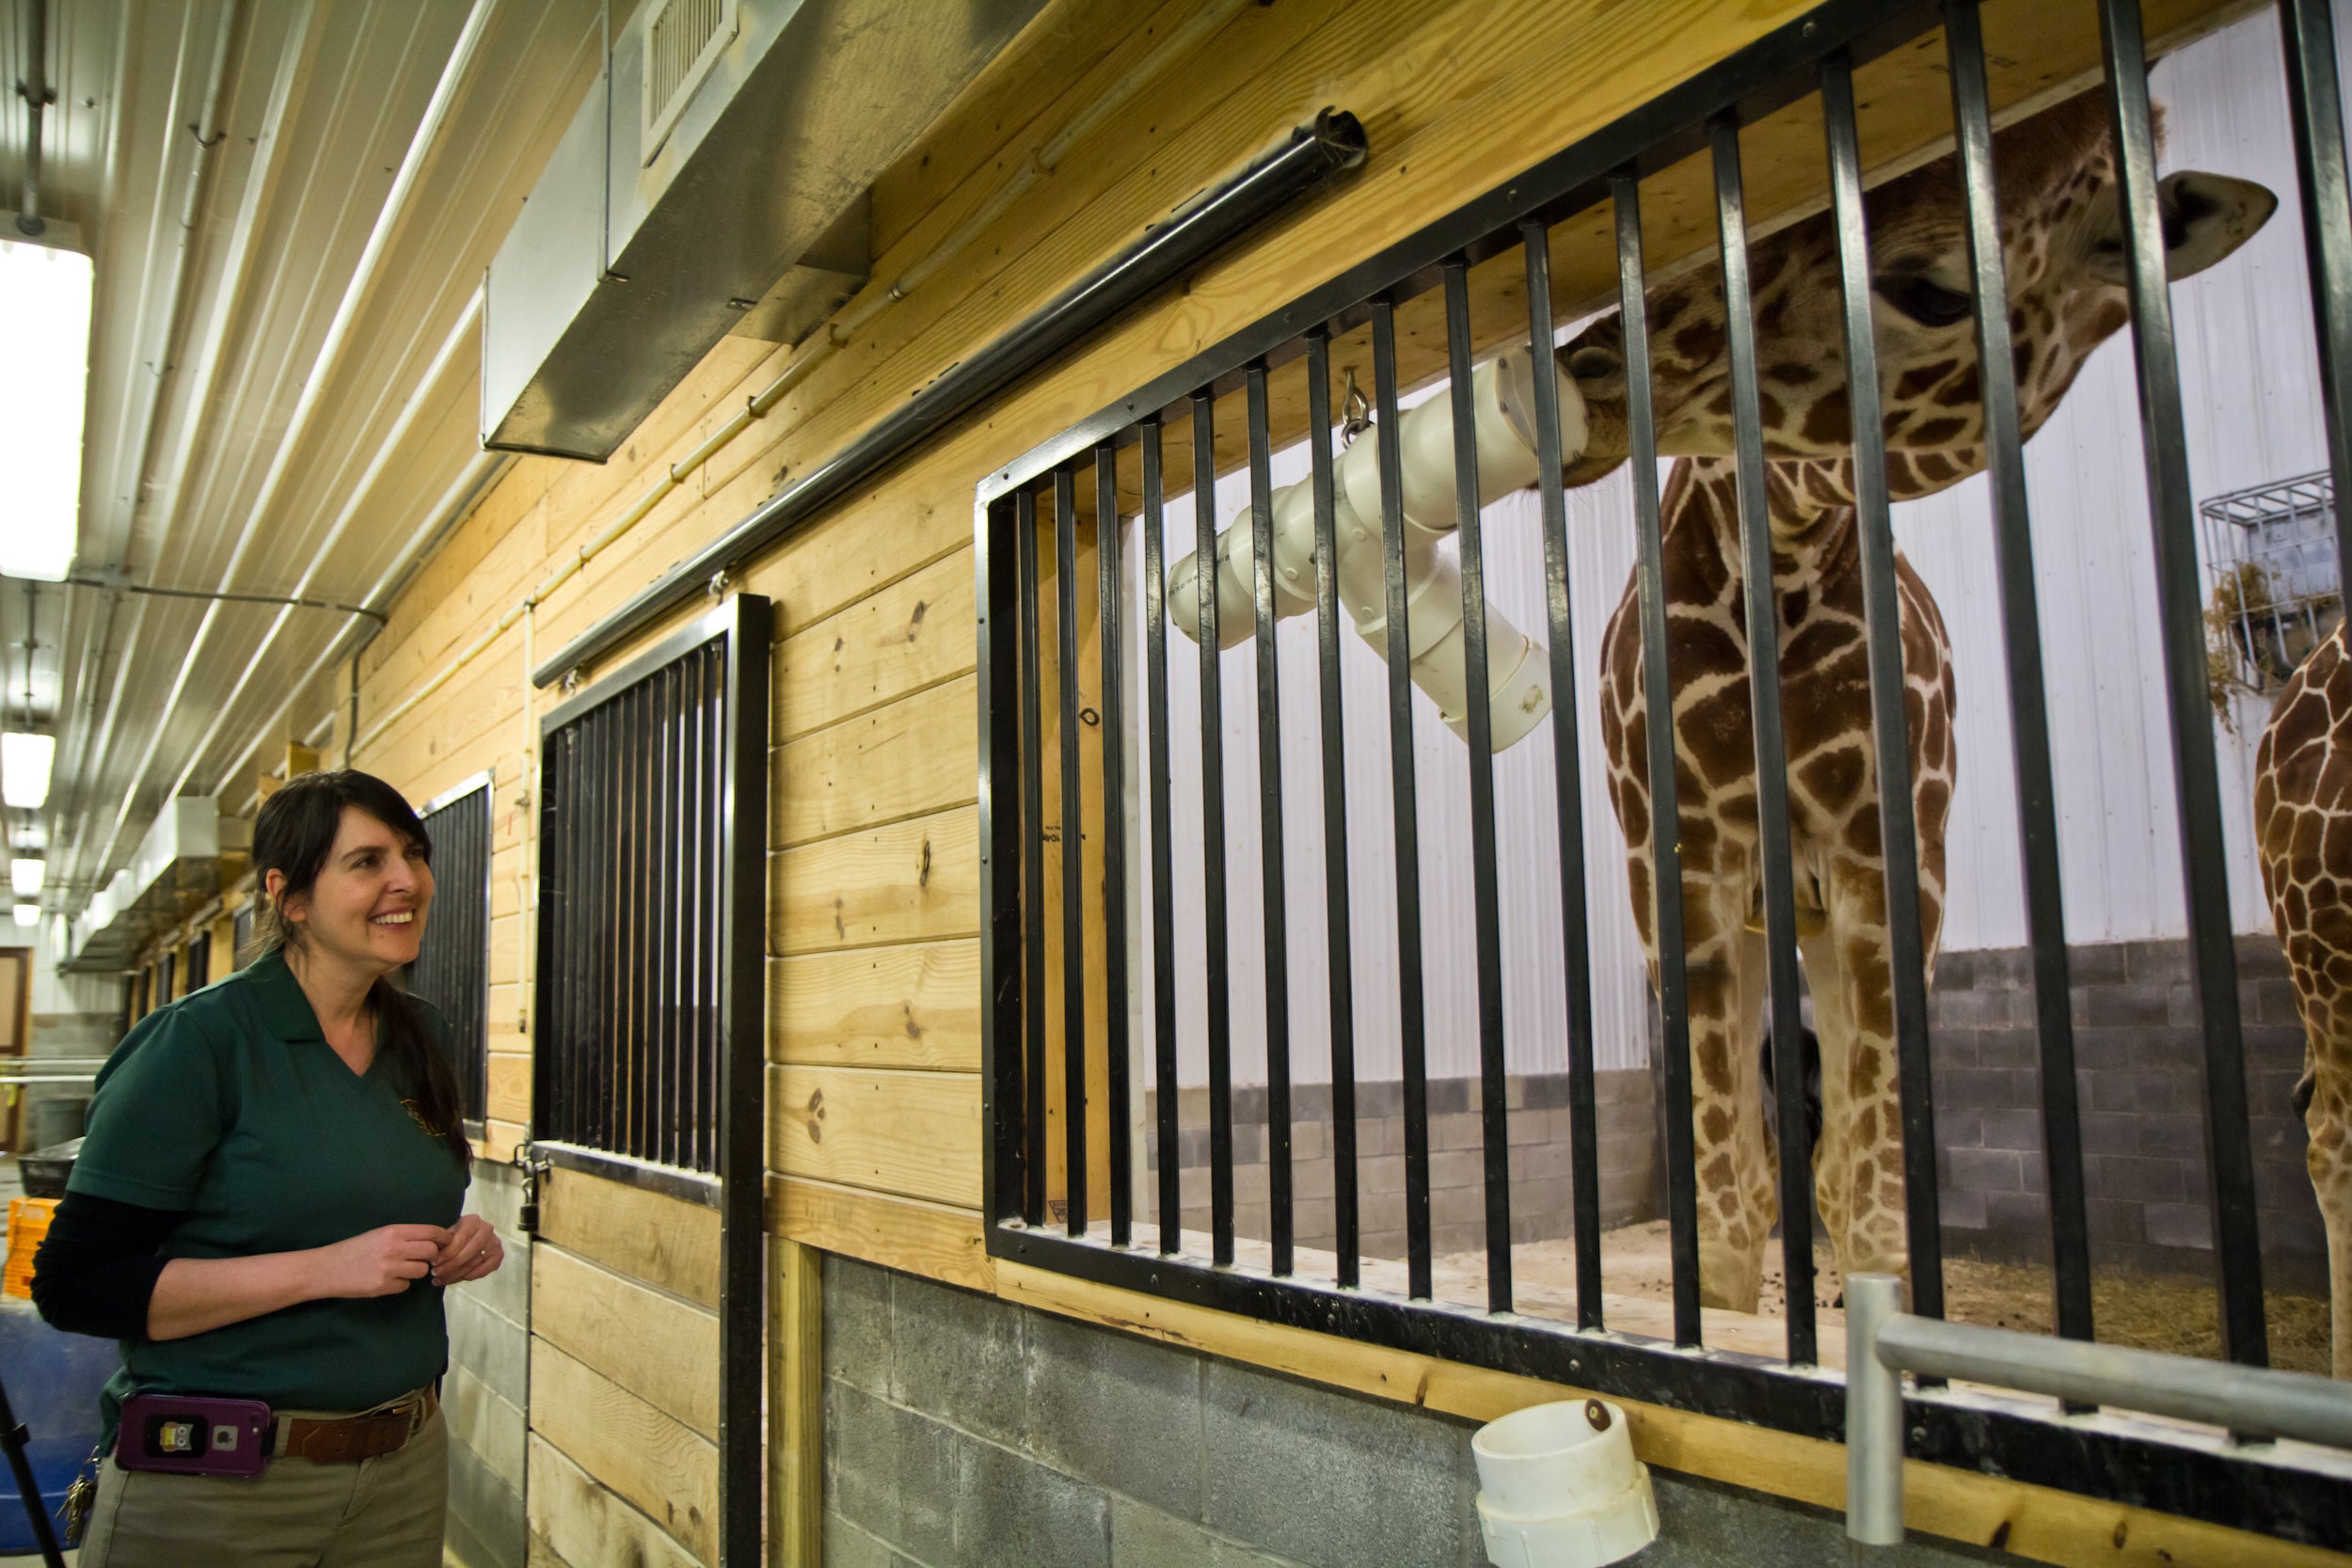 Marina Haynes, General Curator at the Elmwood Park Zoo in Norristown, says that zoo keepers do a lot more than clean animal cages. (